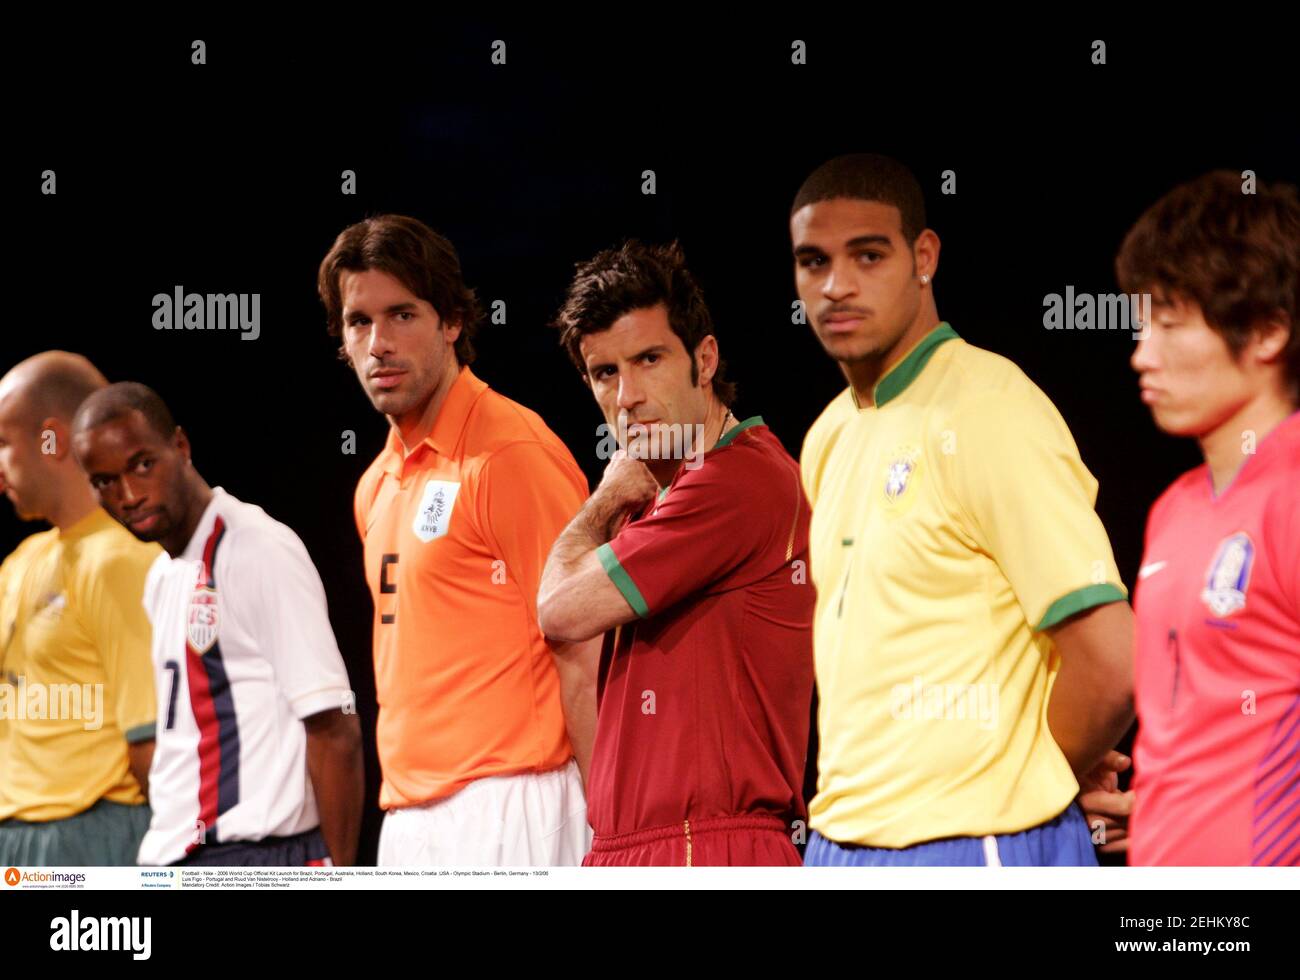 Football - Nike - 2006 World Cup Official Kit Launch for Brazil, Portugal, Australia, Holland, South Korea, Mexico, Croatia & USA - Olympic Stadium - Berlin, Germany - 13/2/06  Luis Figo - Portugal and Ruud Van Nistelrooy - Holland and Adriano - Brazil  Mandatory Credit: Action Images / Tobias Schwarz Stock Photo